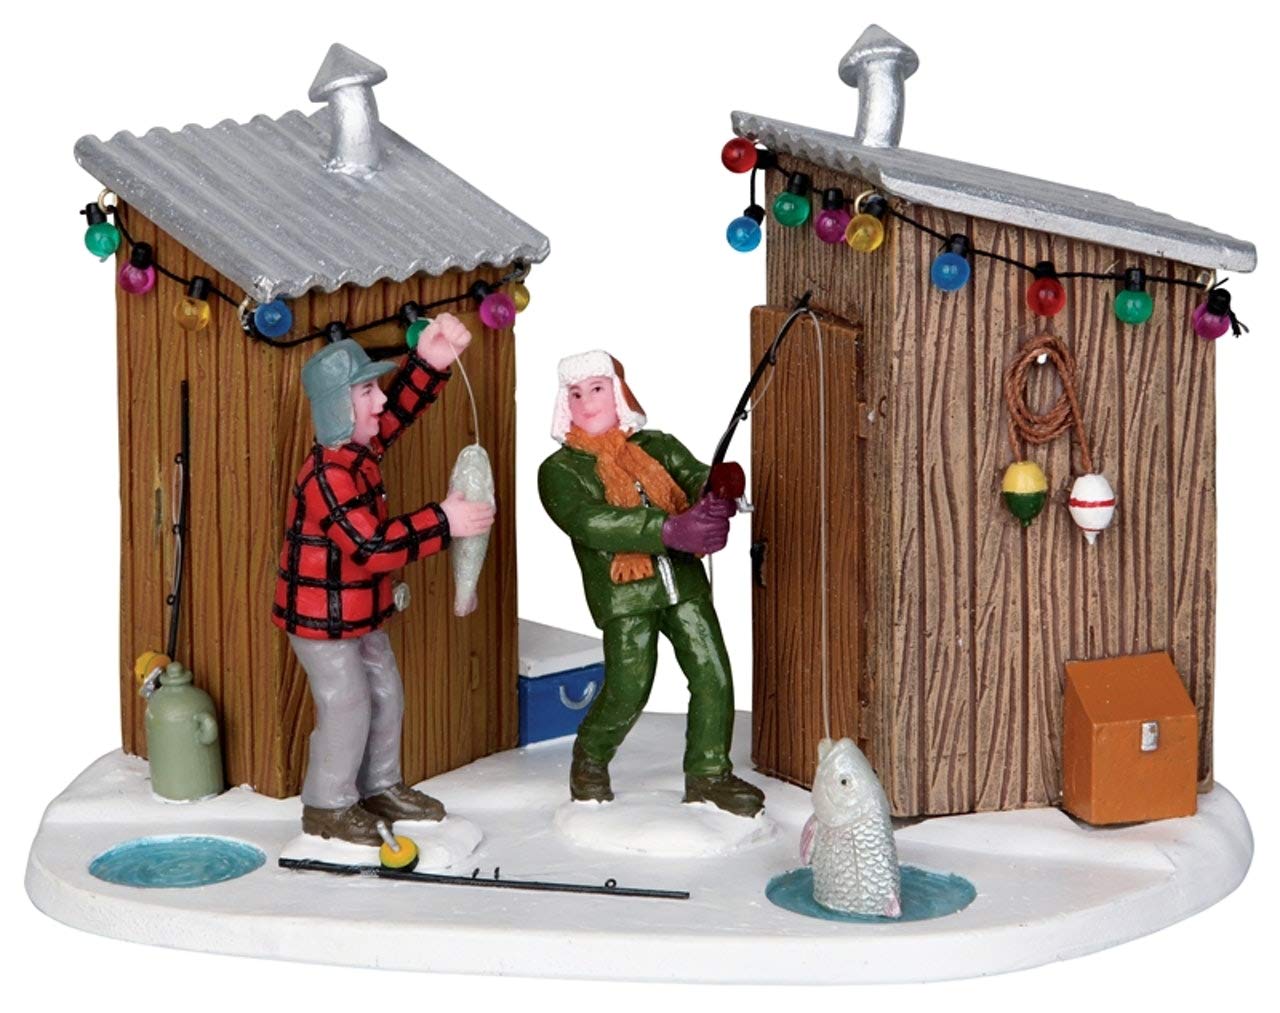 Lemax Inc carole Towne Porcelain Friendly competition Ice Fishing Holiday Display Figure